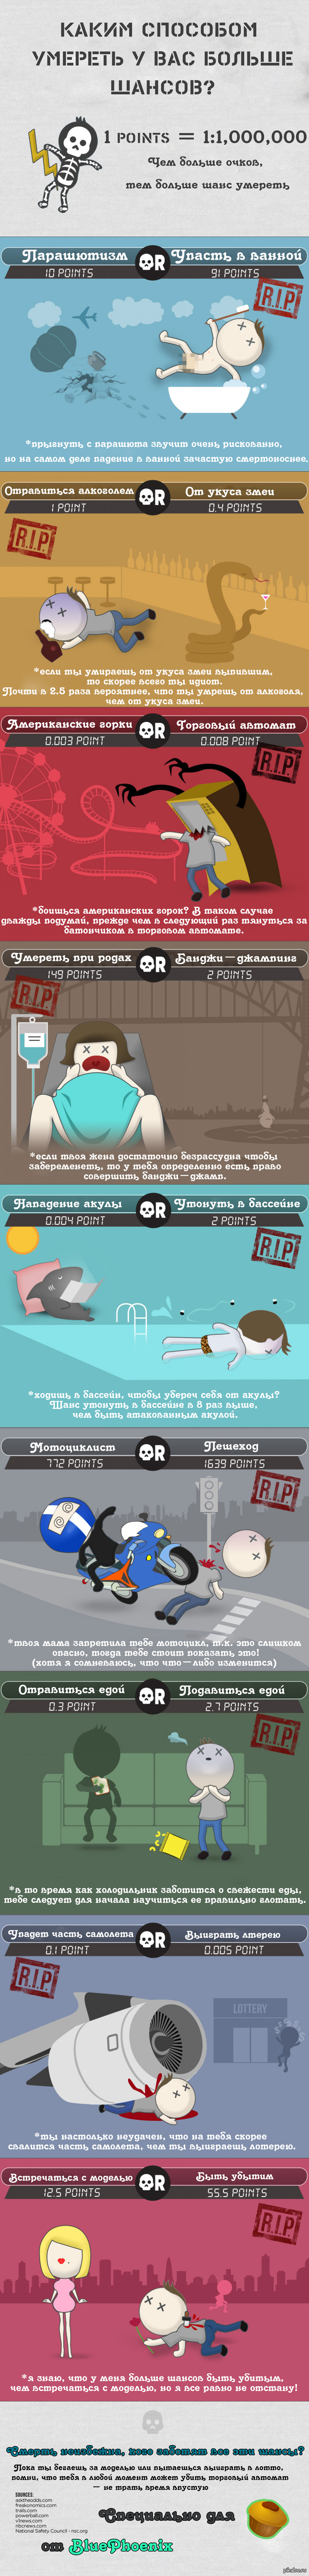 In what way are you more likely to die? - Longpost, Death, Chance, Infographics